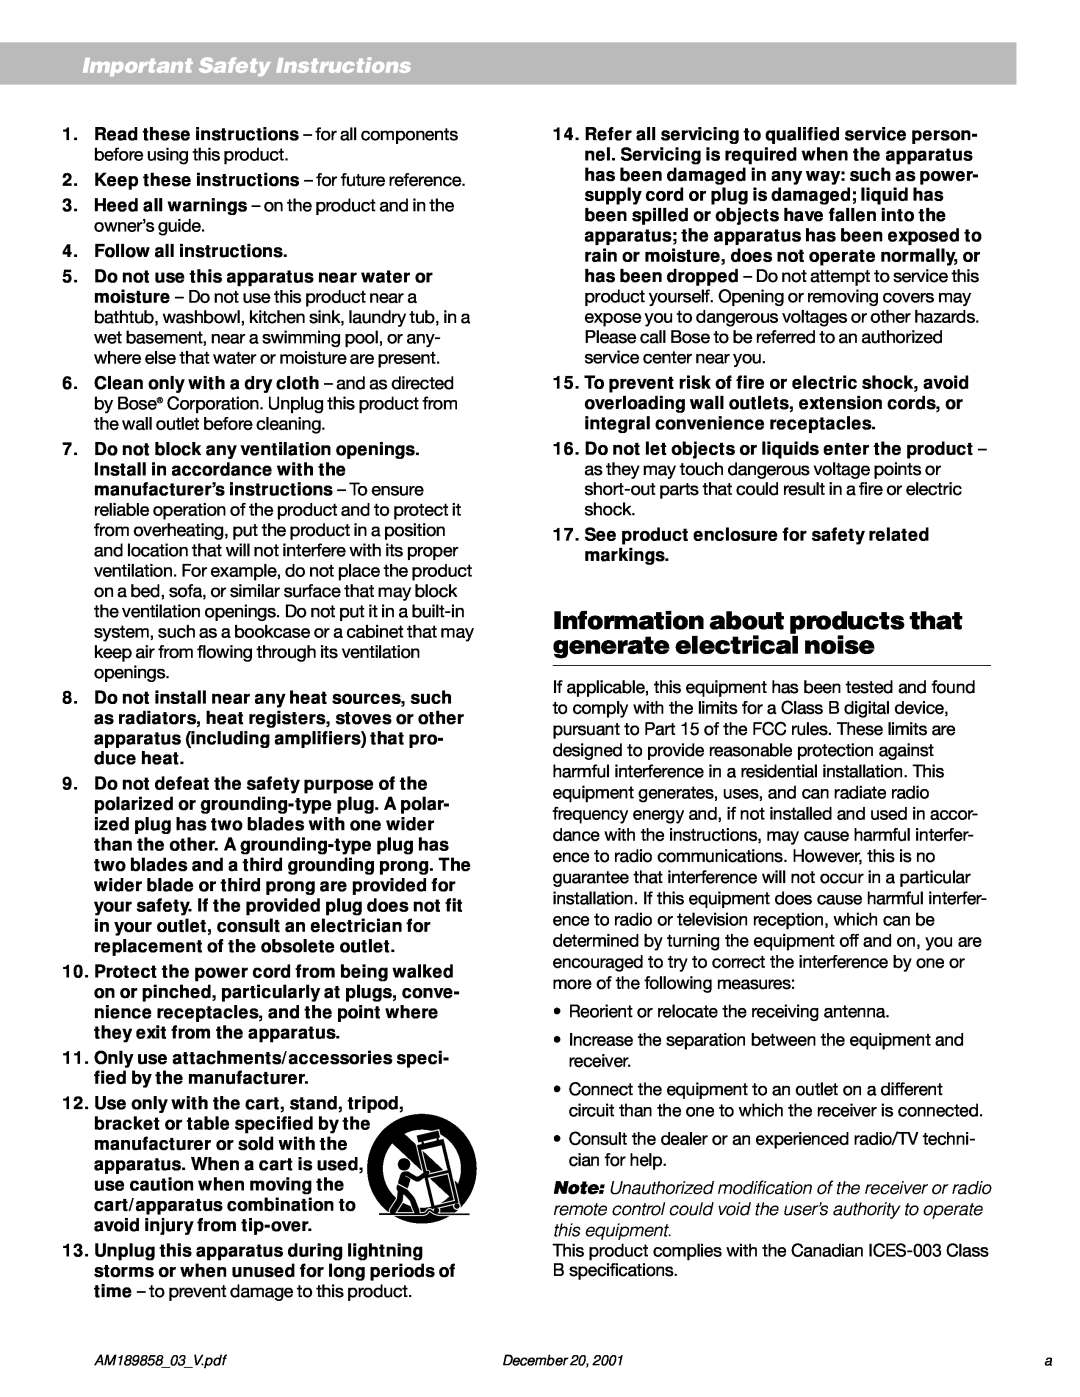 Bose 5 manual Important Safety Instructions 